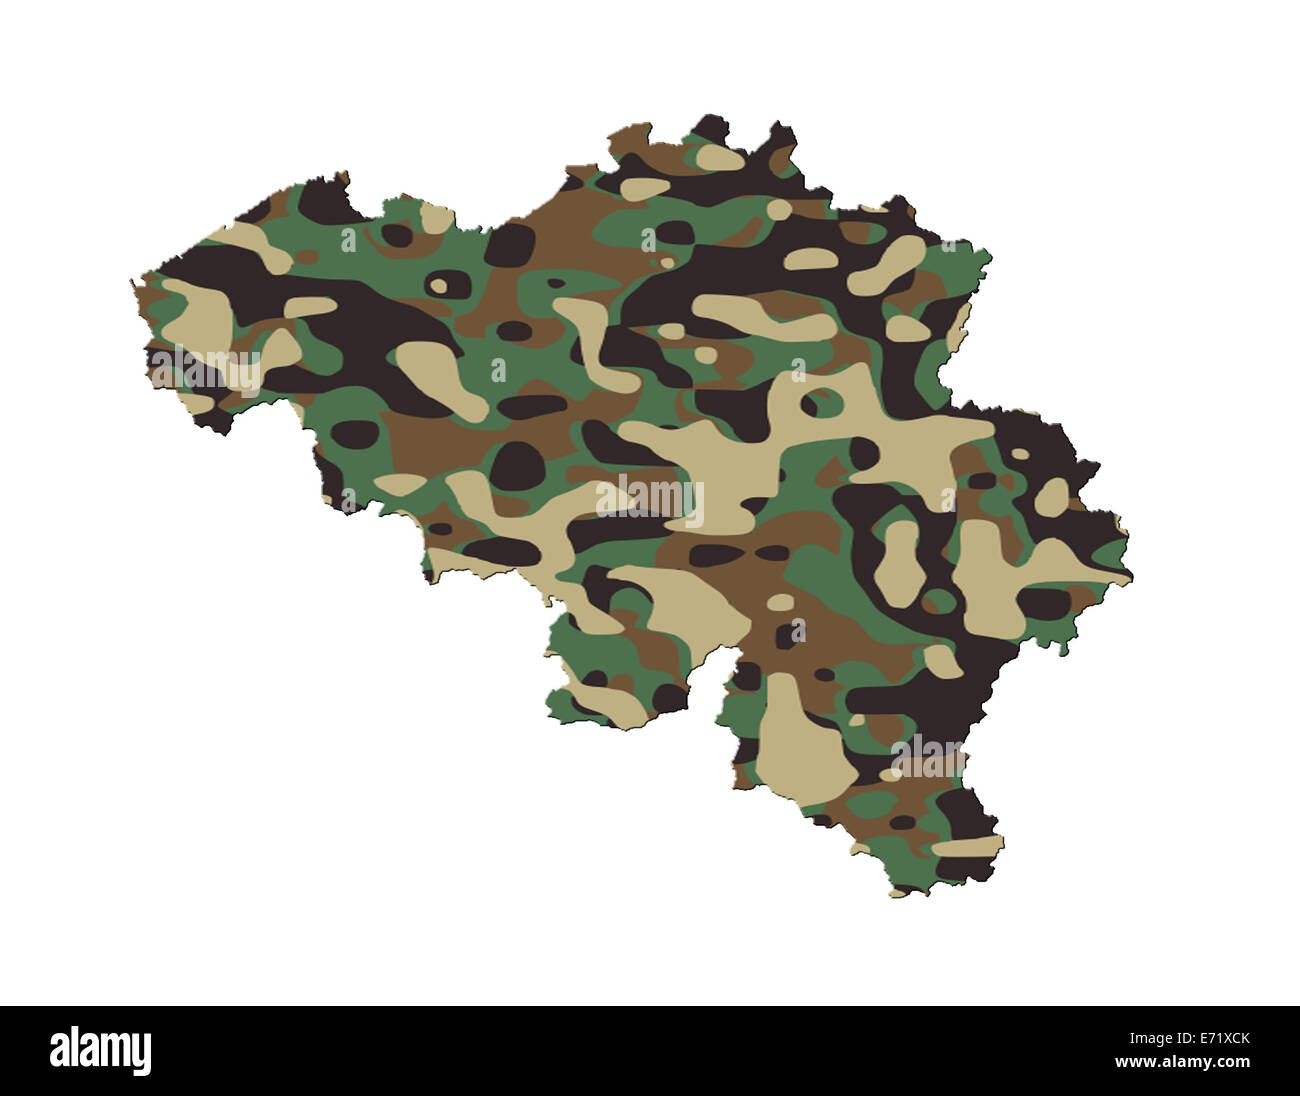 Belgium - Map, filled with an army camo pattern Stock Photo